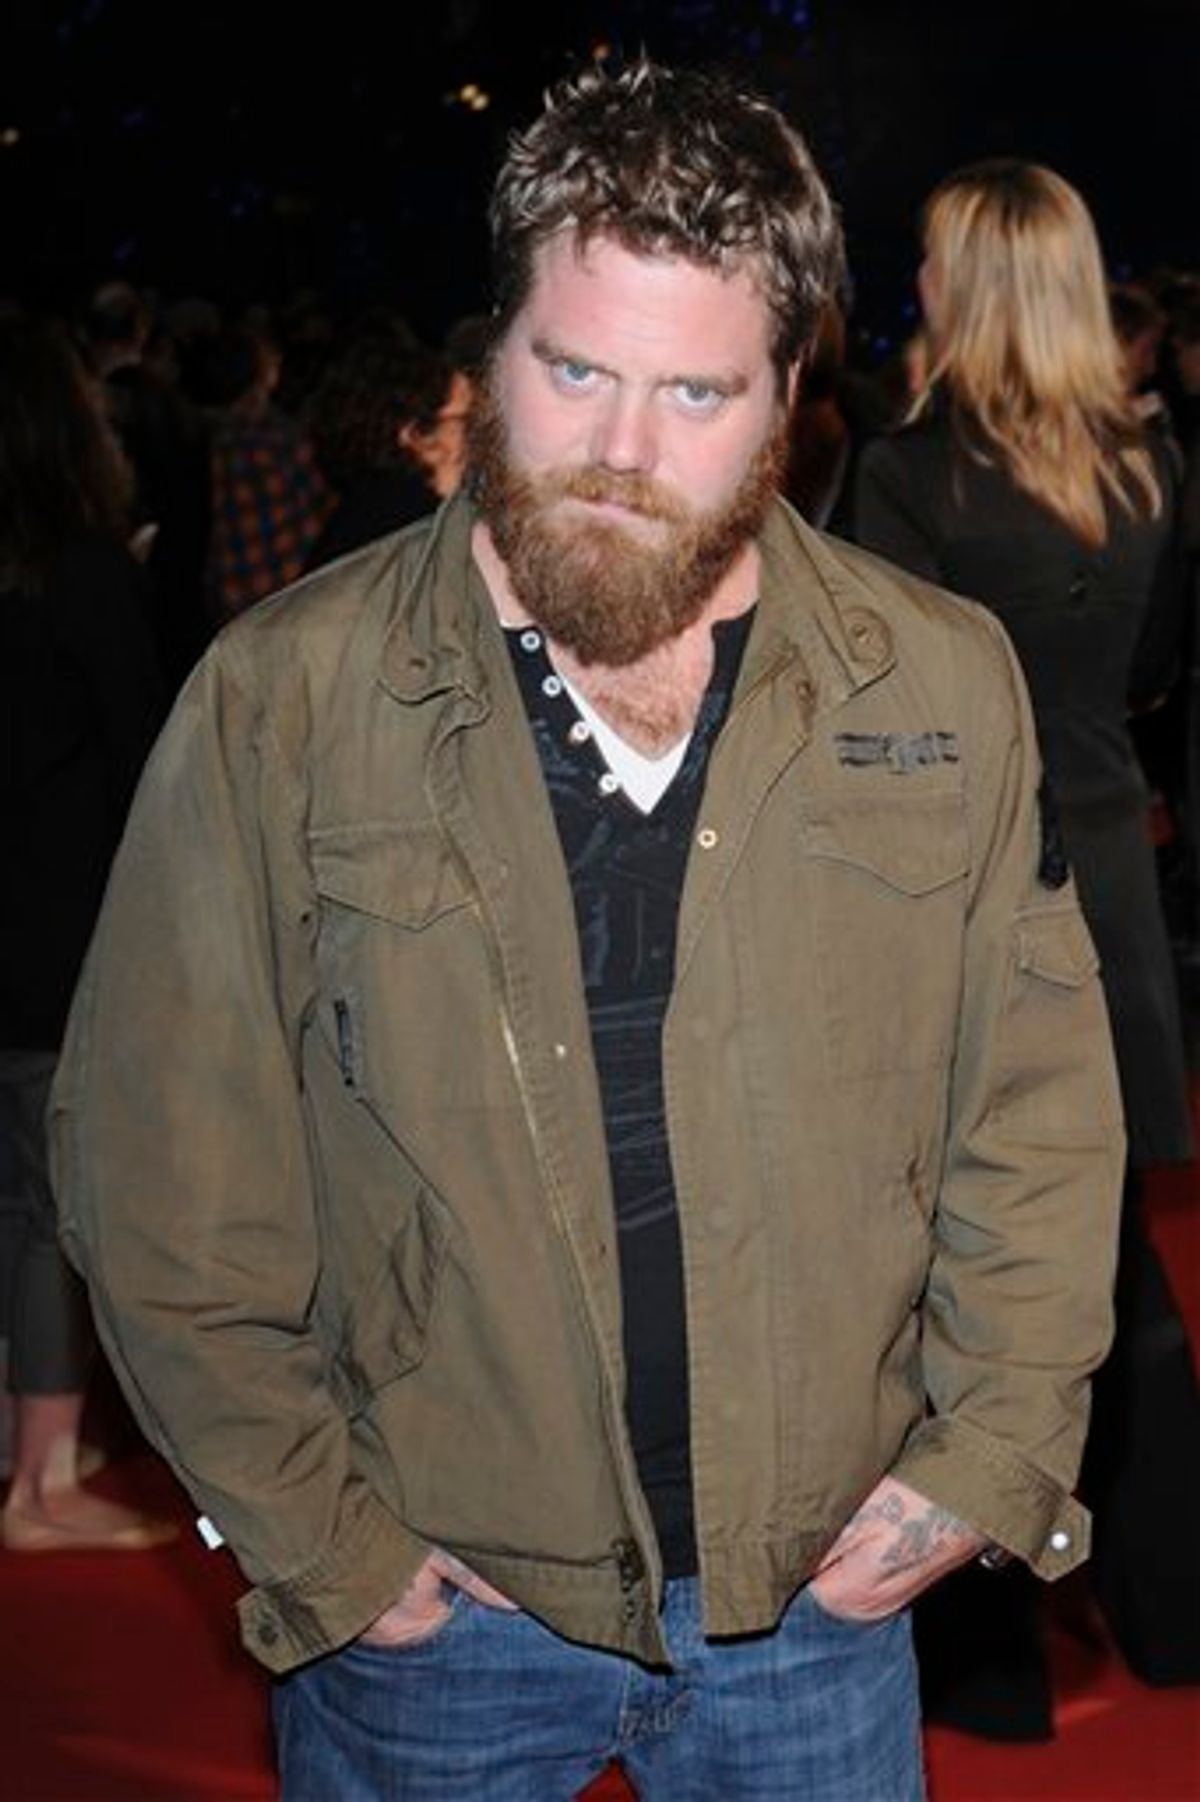 In this Nov. 2, 2010 photo, U.S reality television personality and daredevil Ryan Dunn attends the Jackass 3D UK Premiere at a central London cinema. Police say Dunn and a passenger in his 2007 Porsche died early Monday, June 20, 2011, of injuries sustained in a car crash in suburban Philadelphia. (AP Photo/dapd, Jorge Herrera) GERMANY OUT; AUSTRIA OUT; SWITZERLAND OUT (AP)